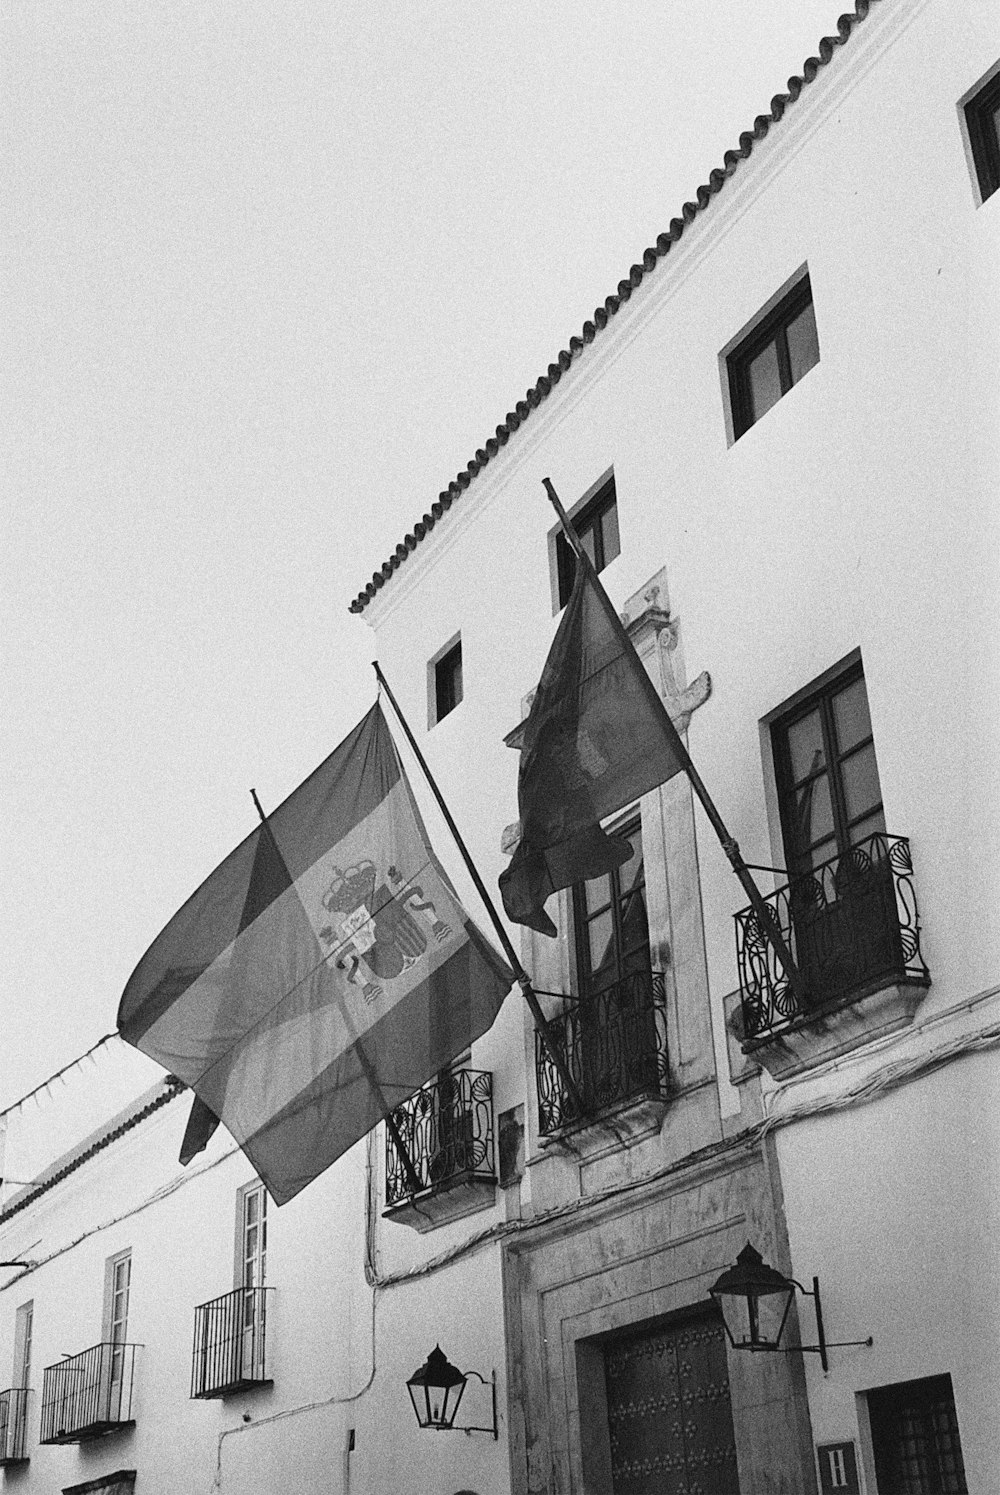 grayscale photo of flag on pole